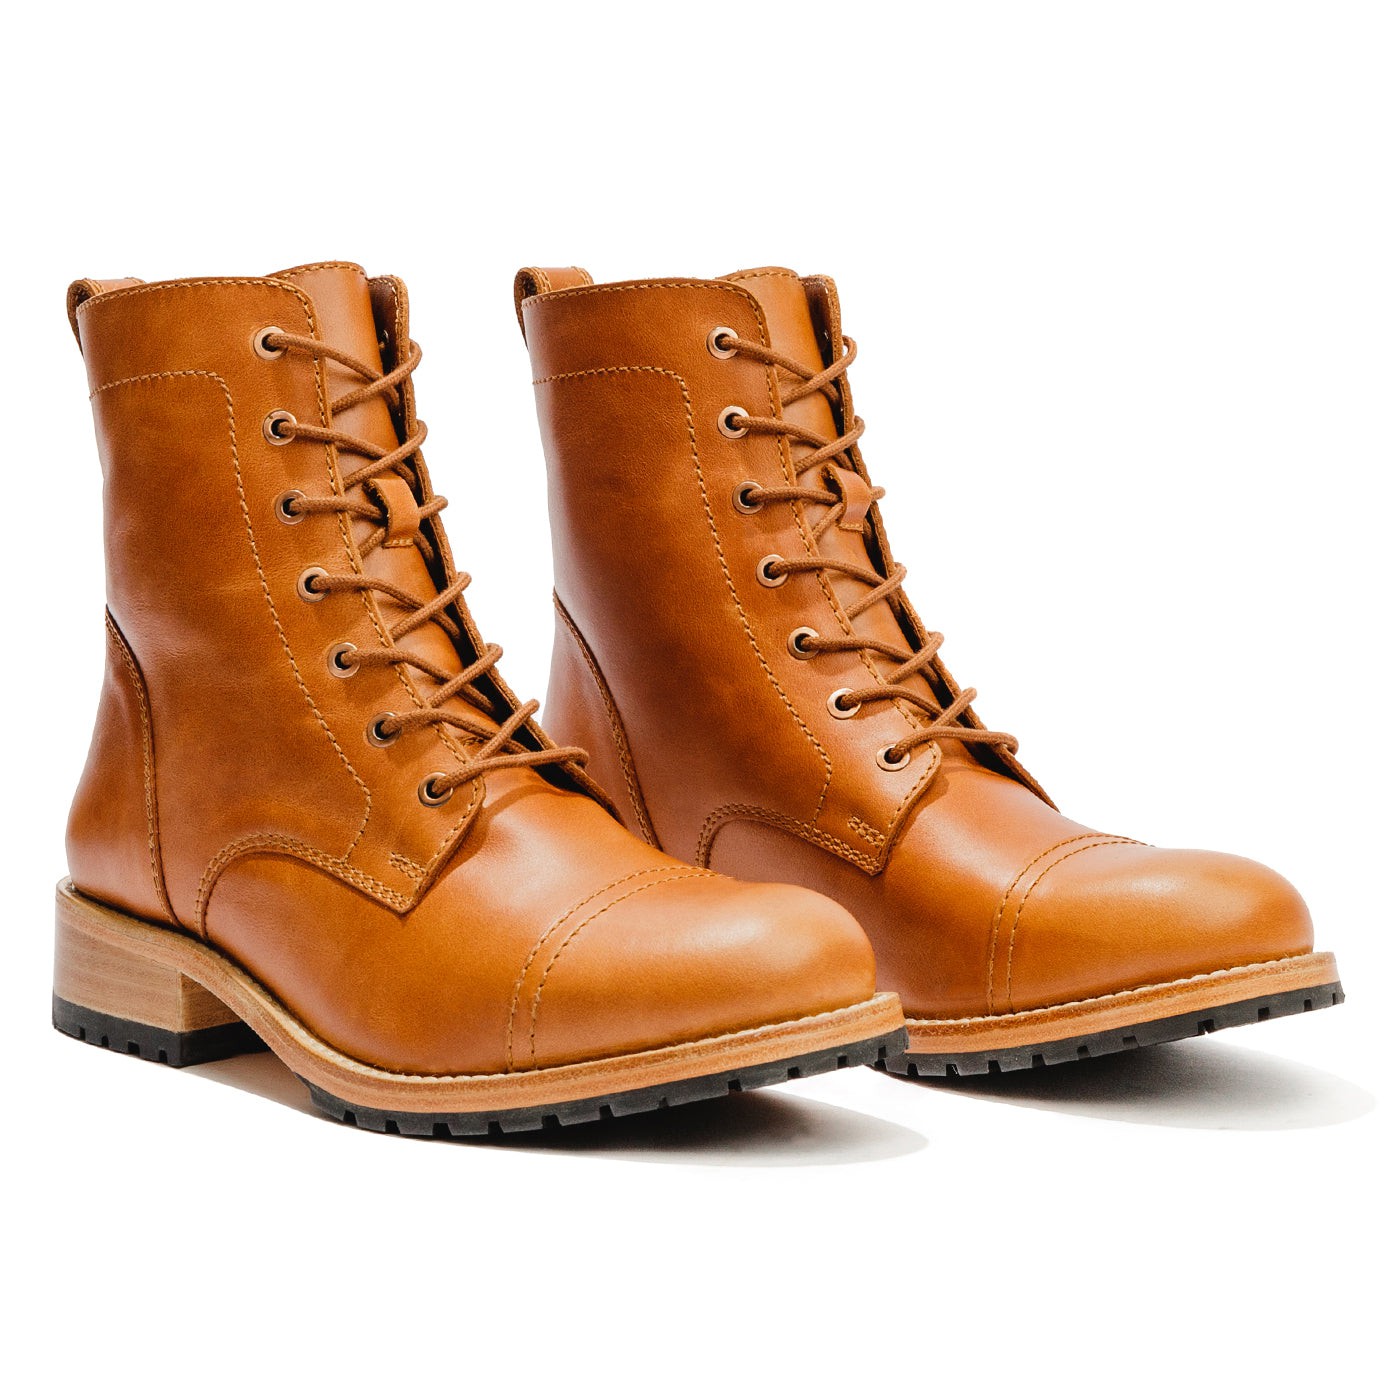 Women's Lace-up Boot